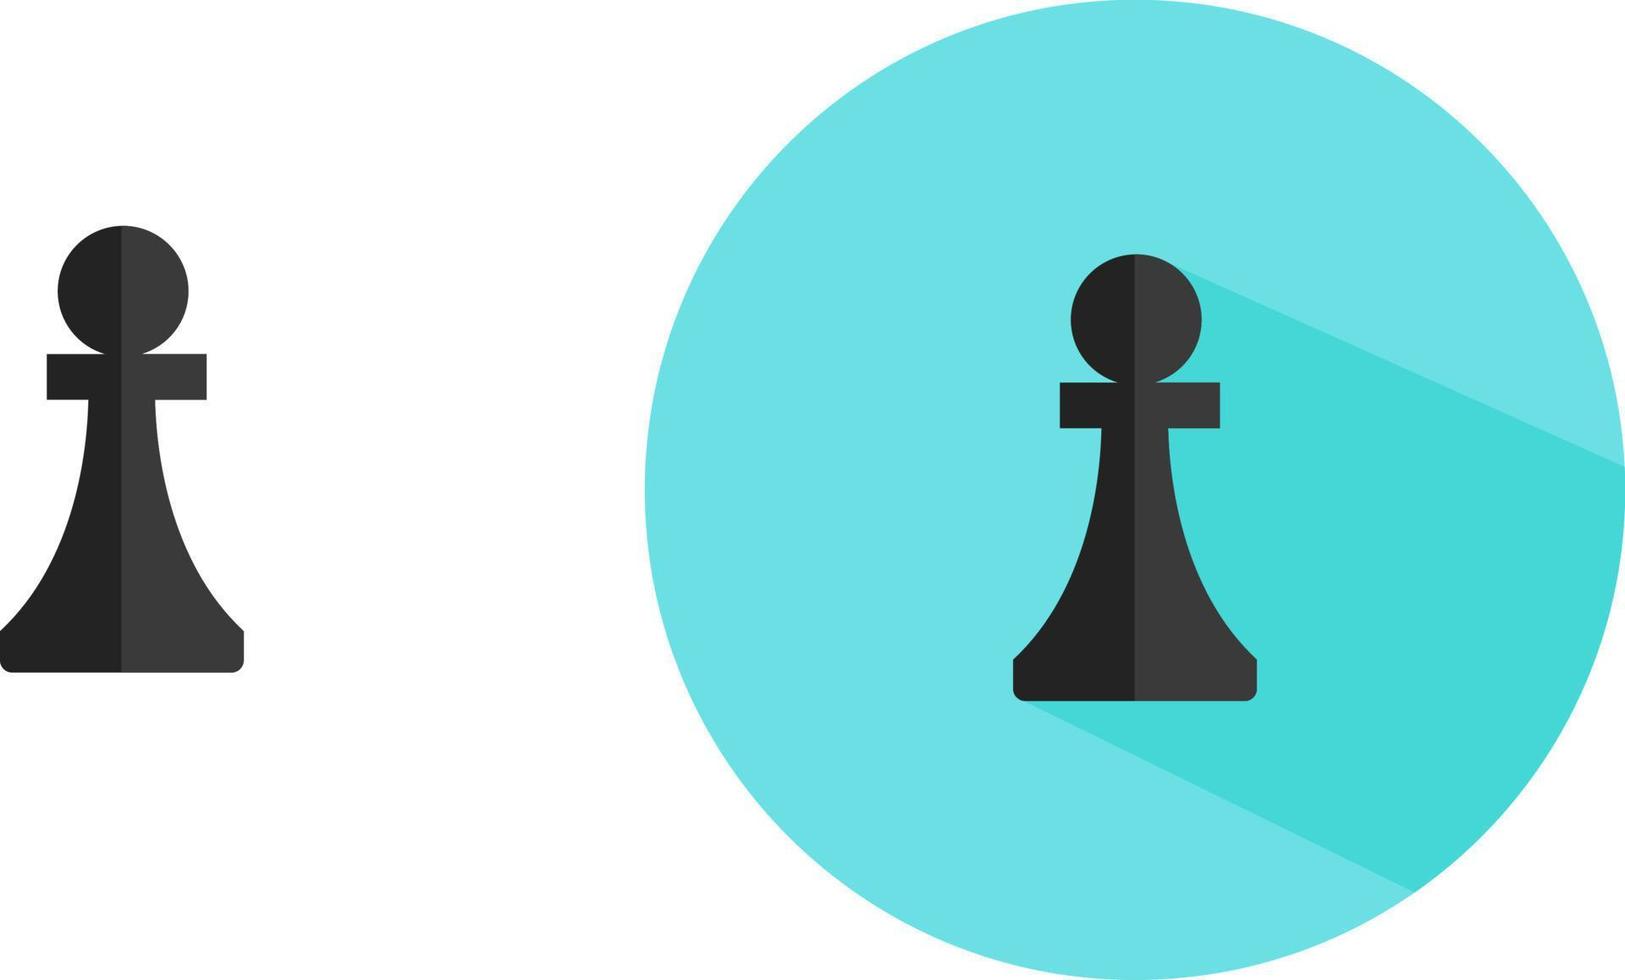 Chess pawn ,illustration, vector on white background.